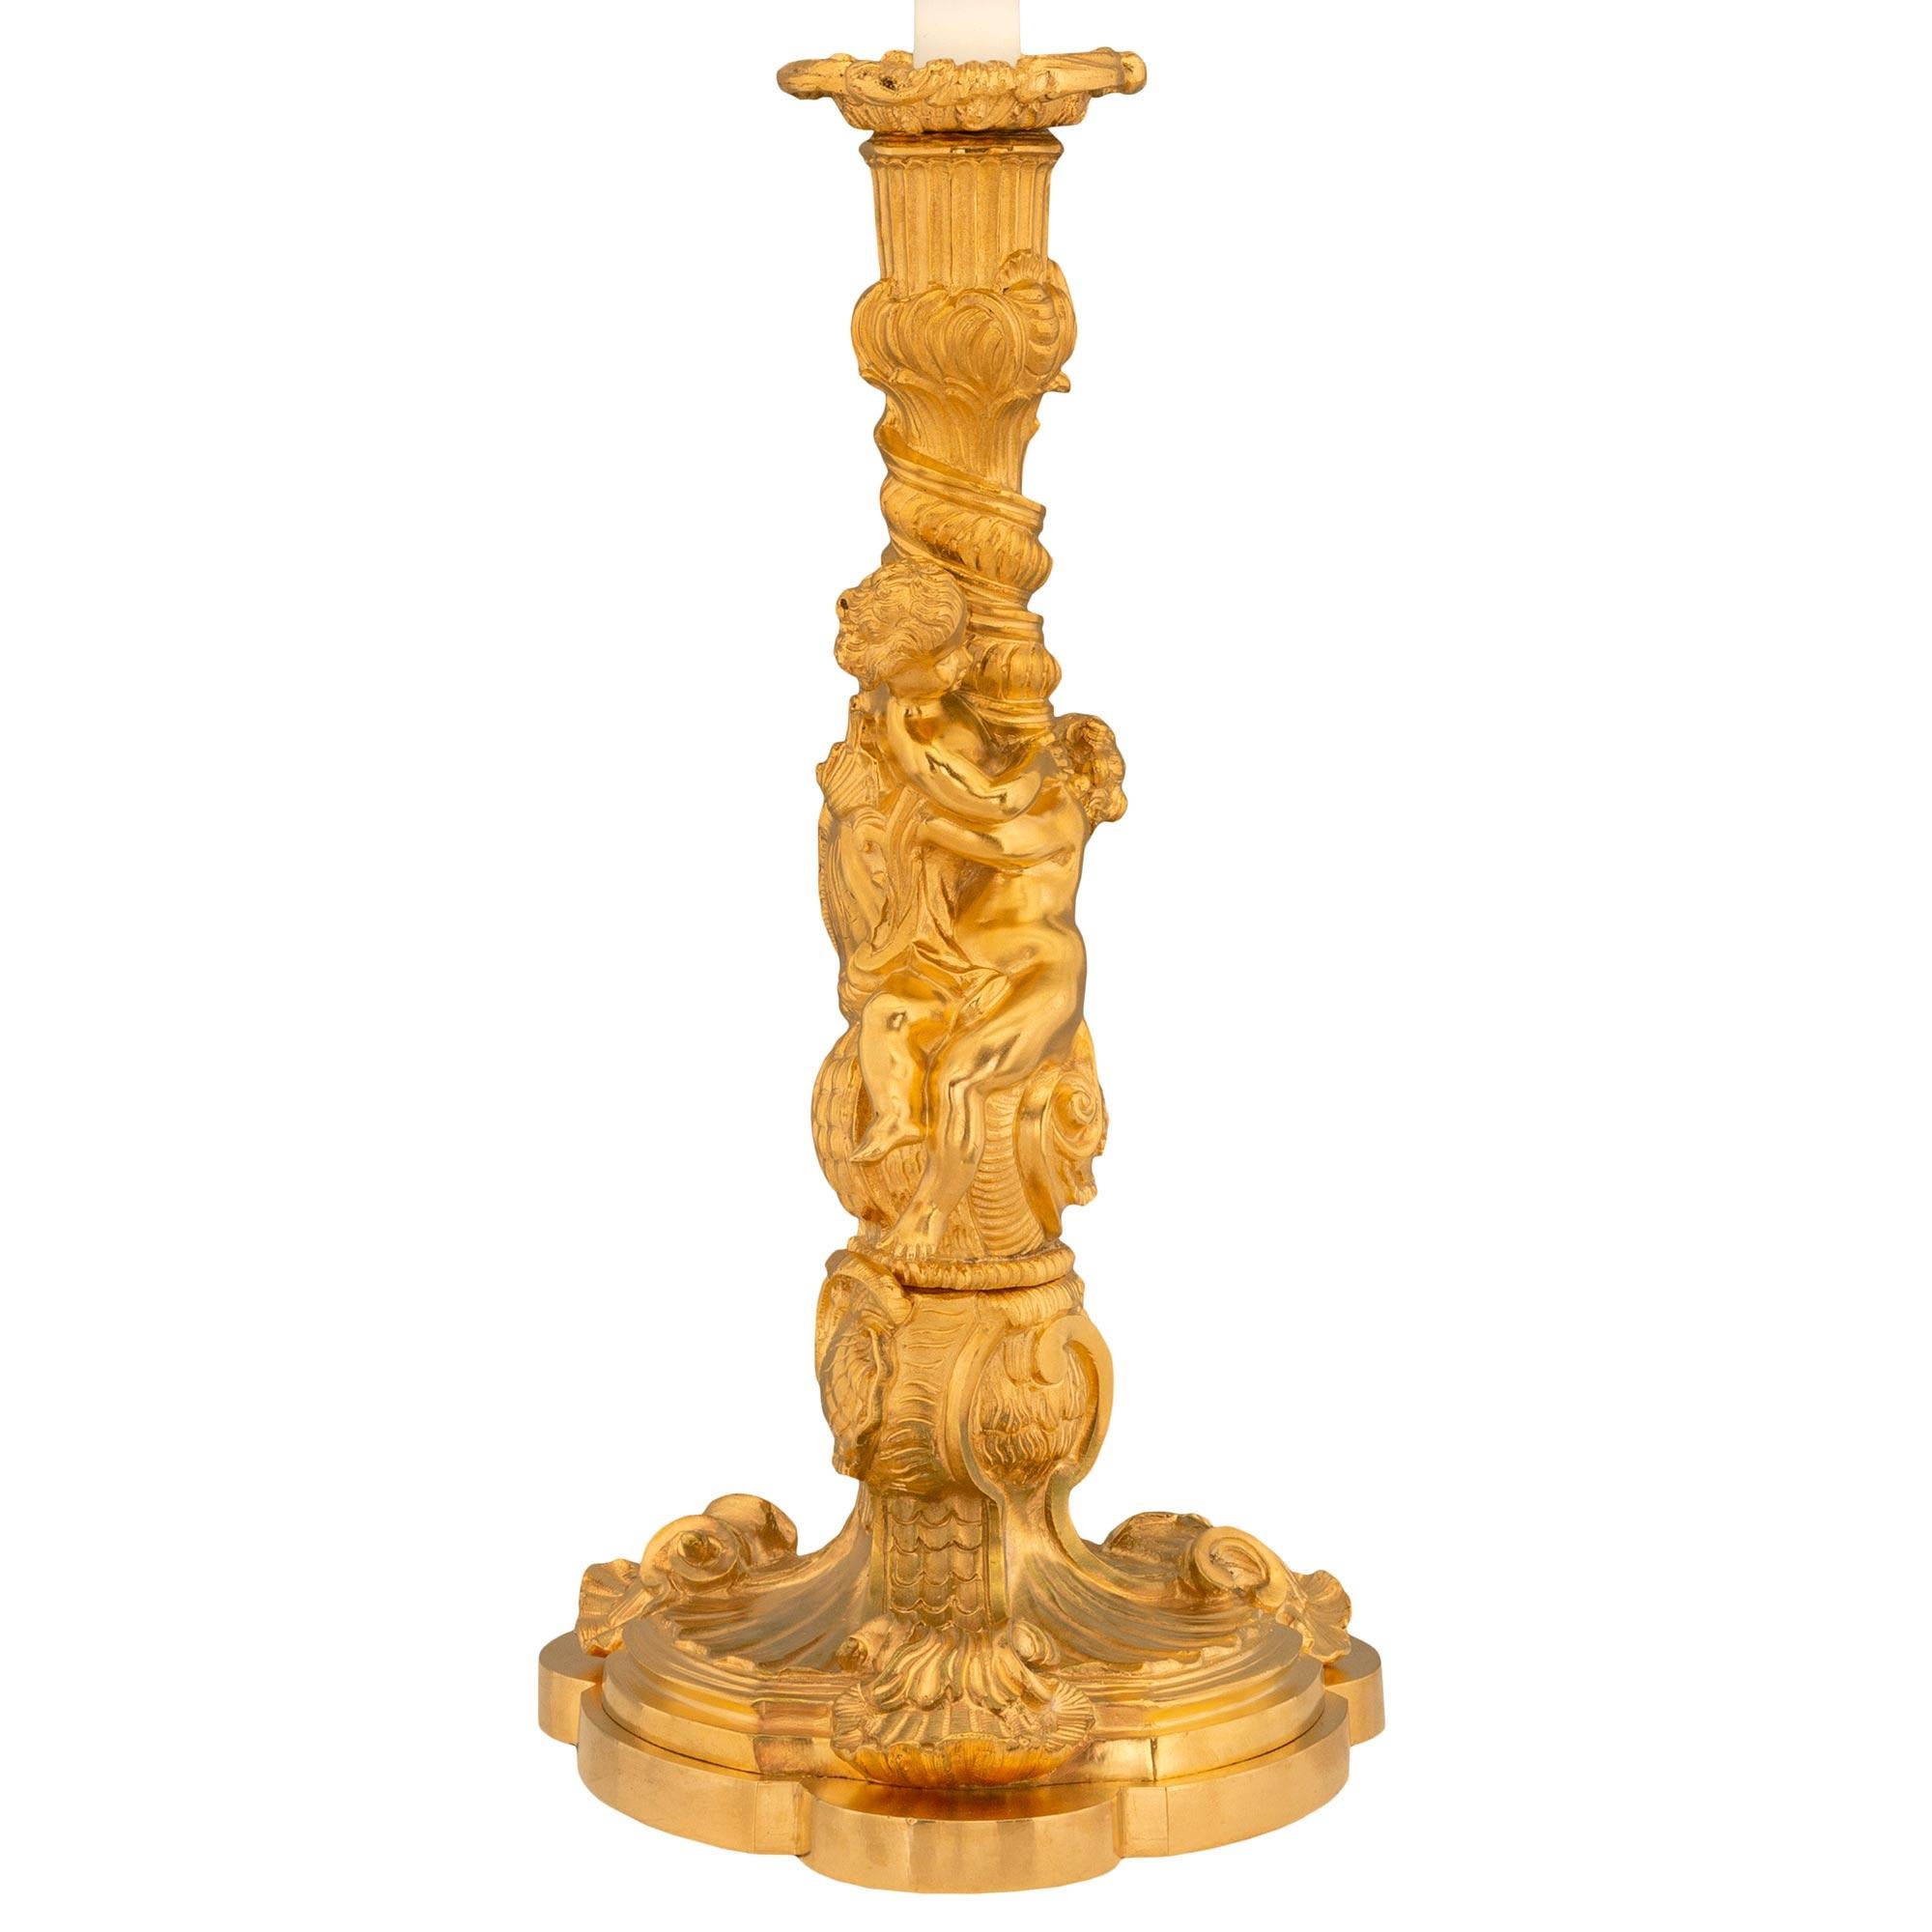 A beautiful and very high quality pair of French 19th century Louis XV st. Belle Époque Period ormolu candlesticks. Each candlestick is raised by a fine scalloped base with a delicate wrap around mottled border and three exceptional richly chased